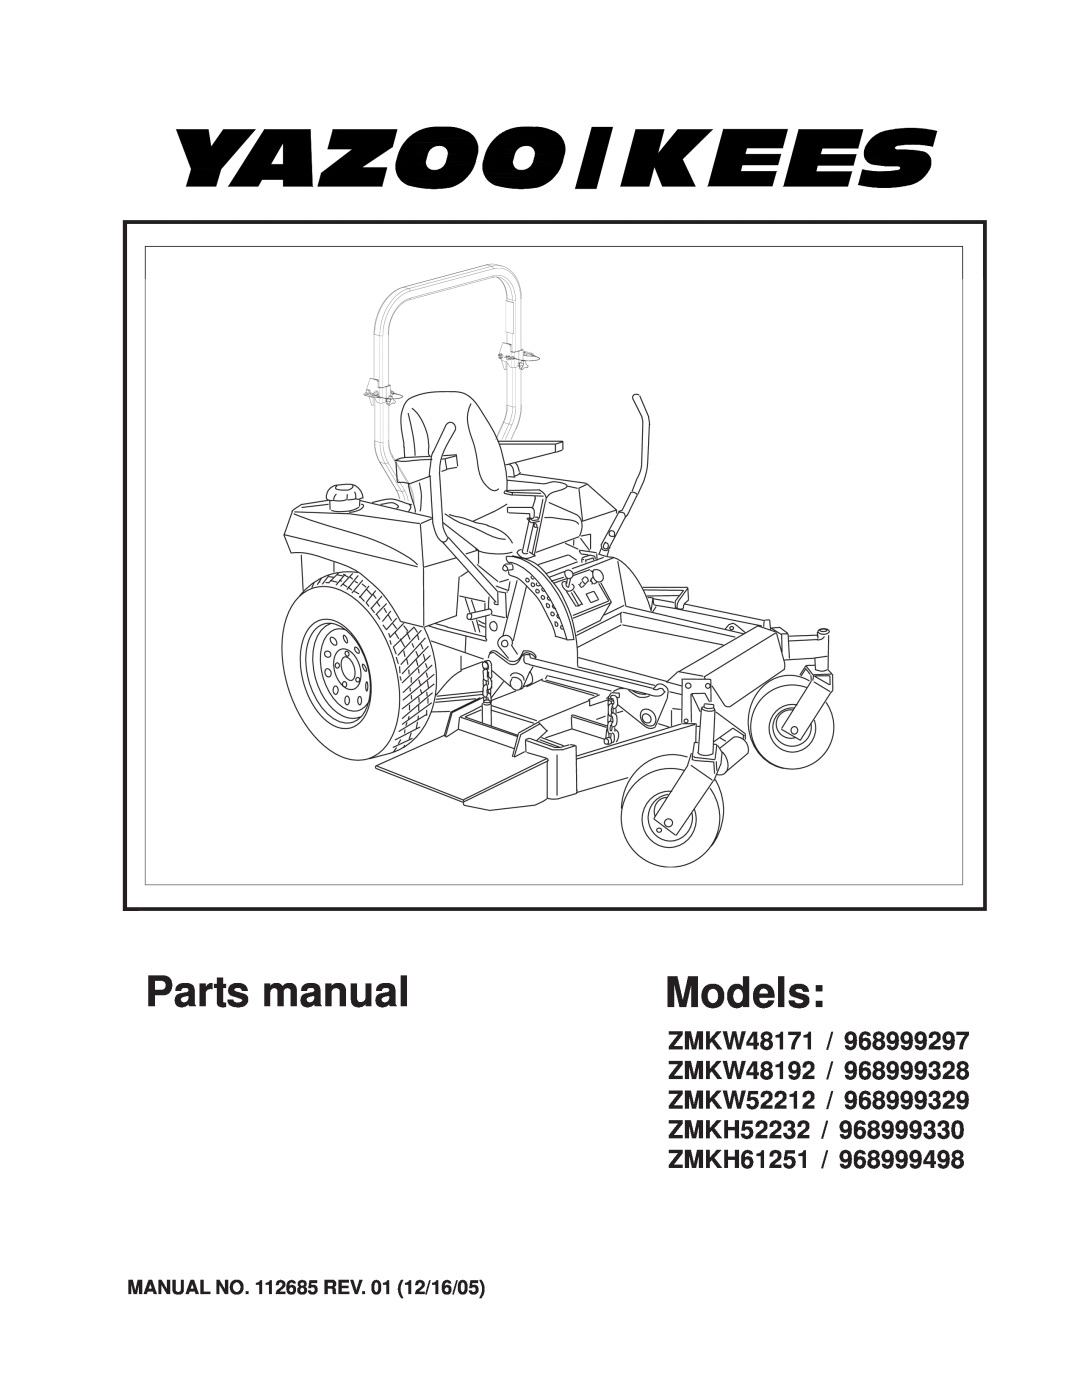 Yazoo/Kees manual ZMKW48171, ZMKW48192, ZMKW52212, ZMKH52232, ZMKH61251, Parts manual, Models 